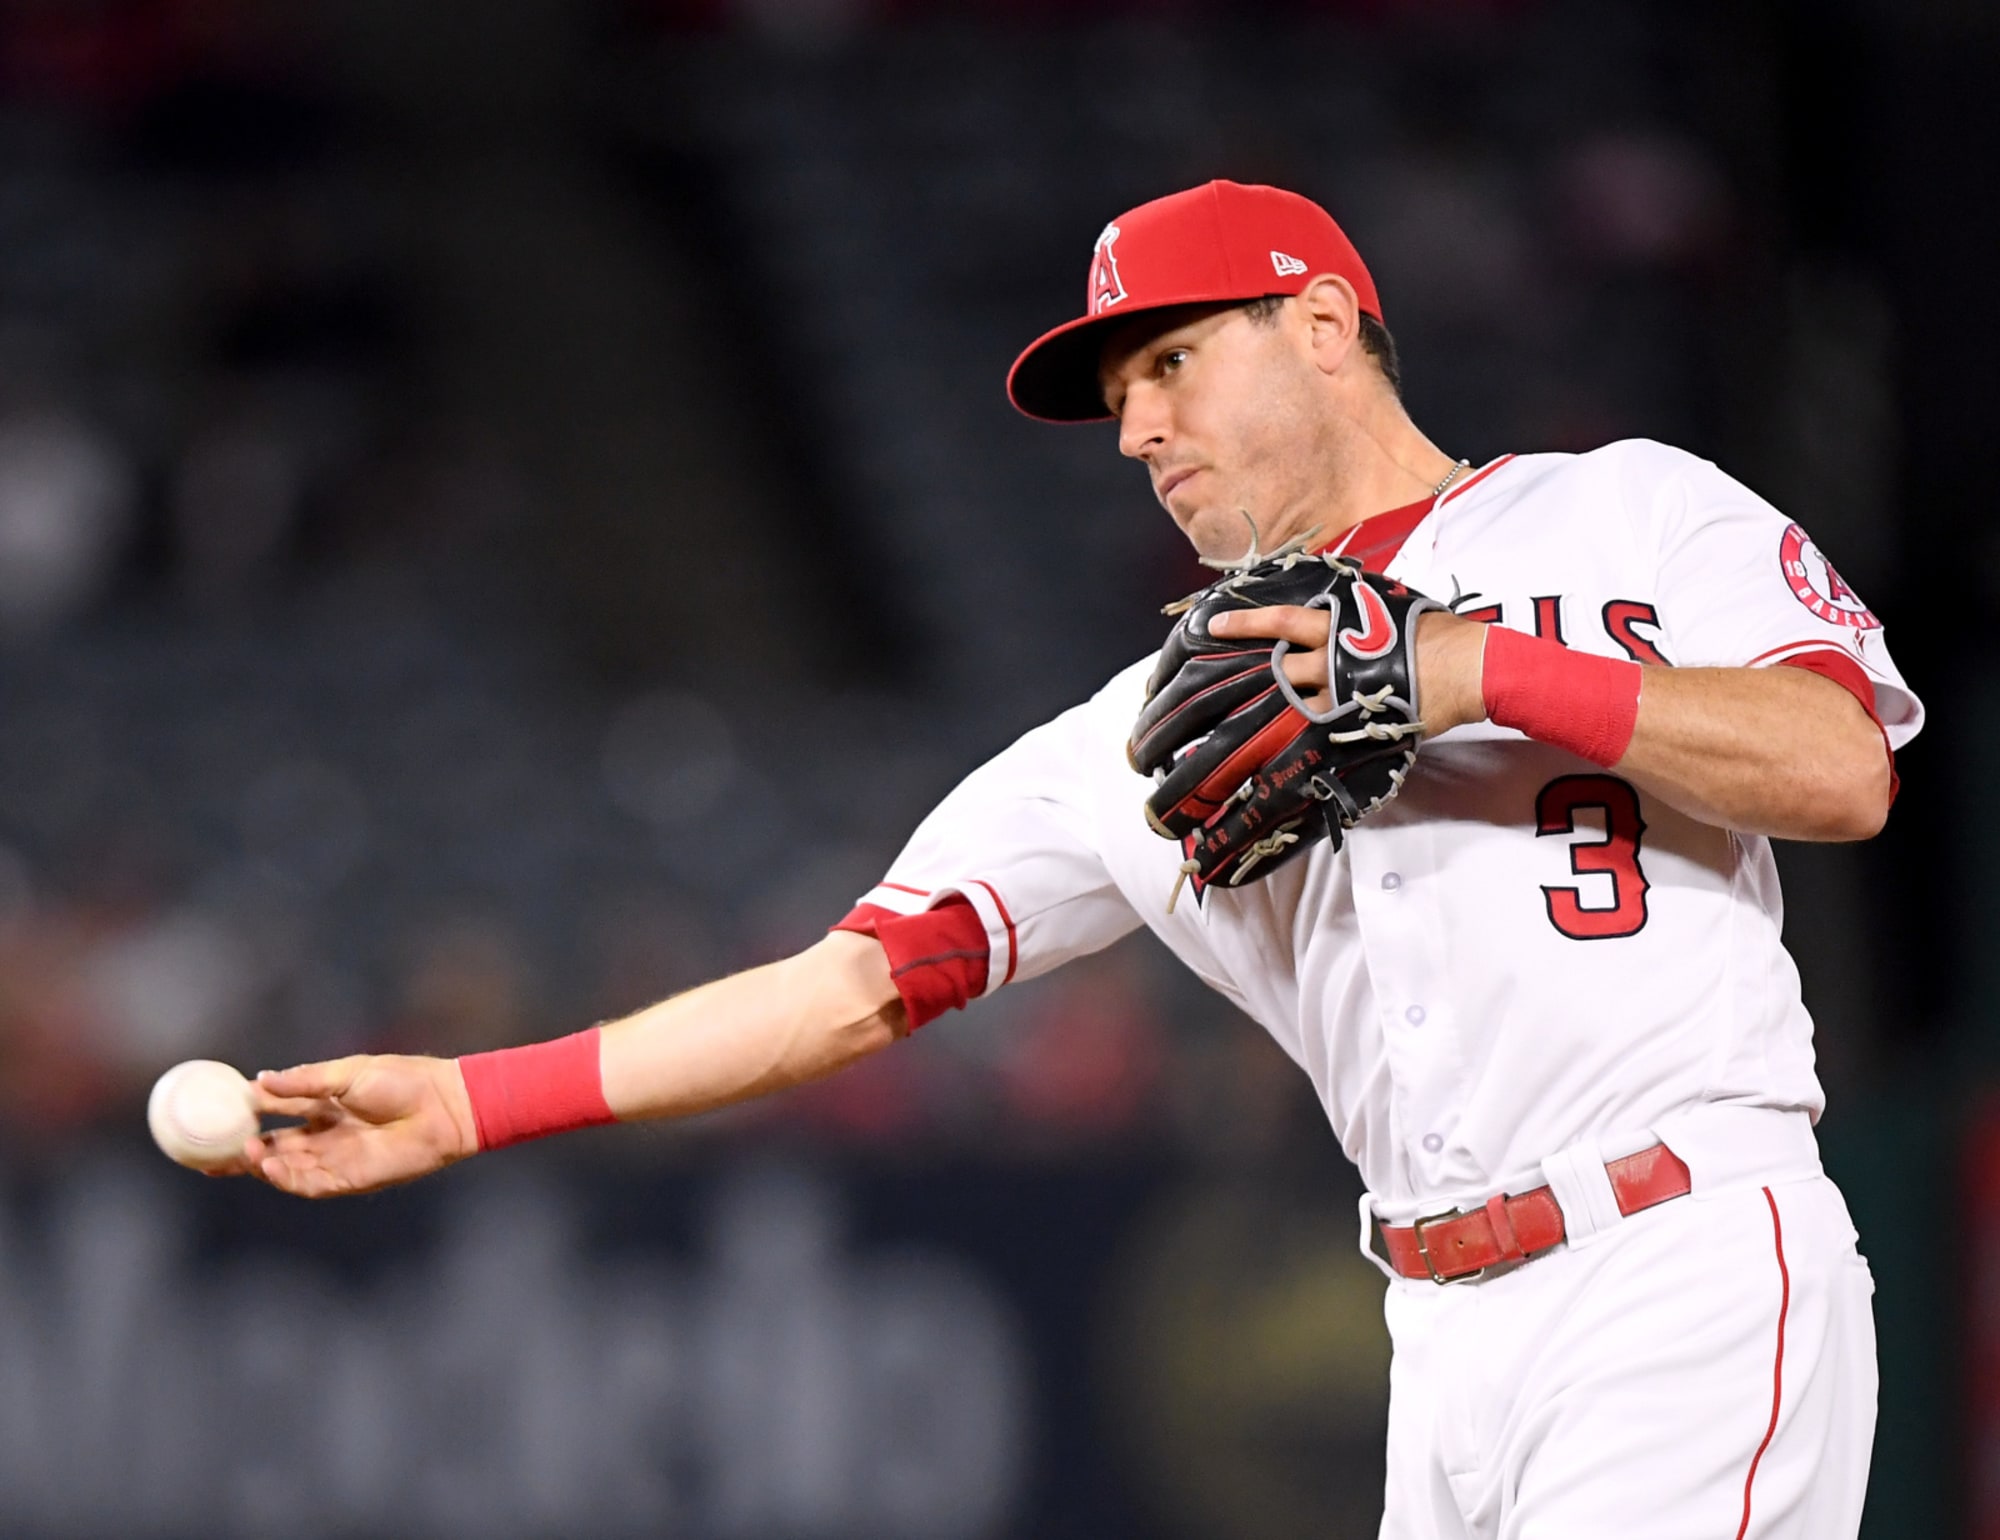 Boston Red Sox: Why Ian Kinsler is a solid Dustin Pedroia replacement